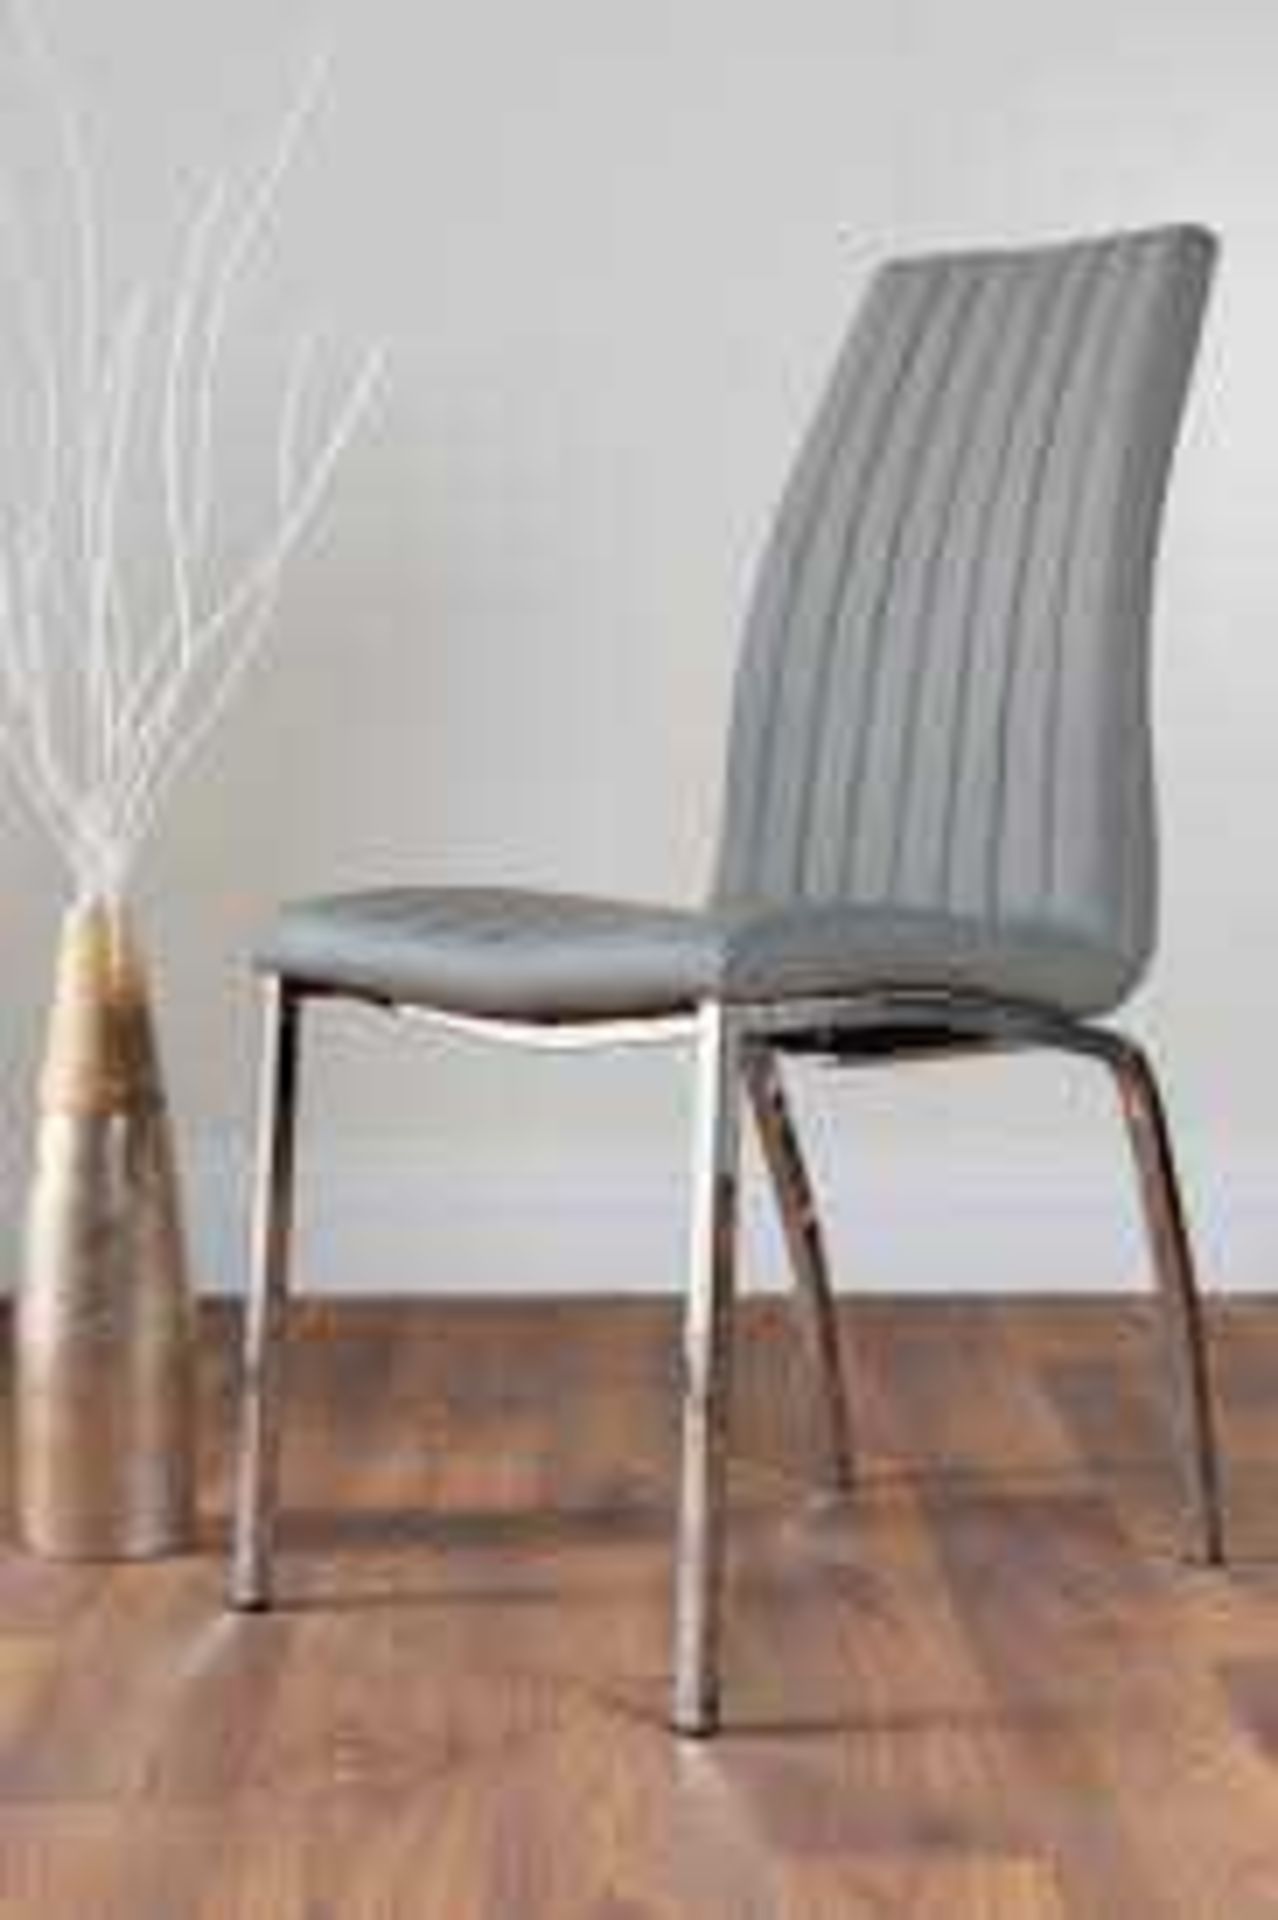 RRP £120 Boxed Isco Elephant Grey Dining Chair 2 Pcs